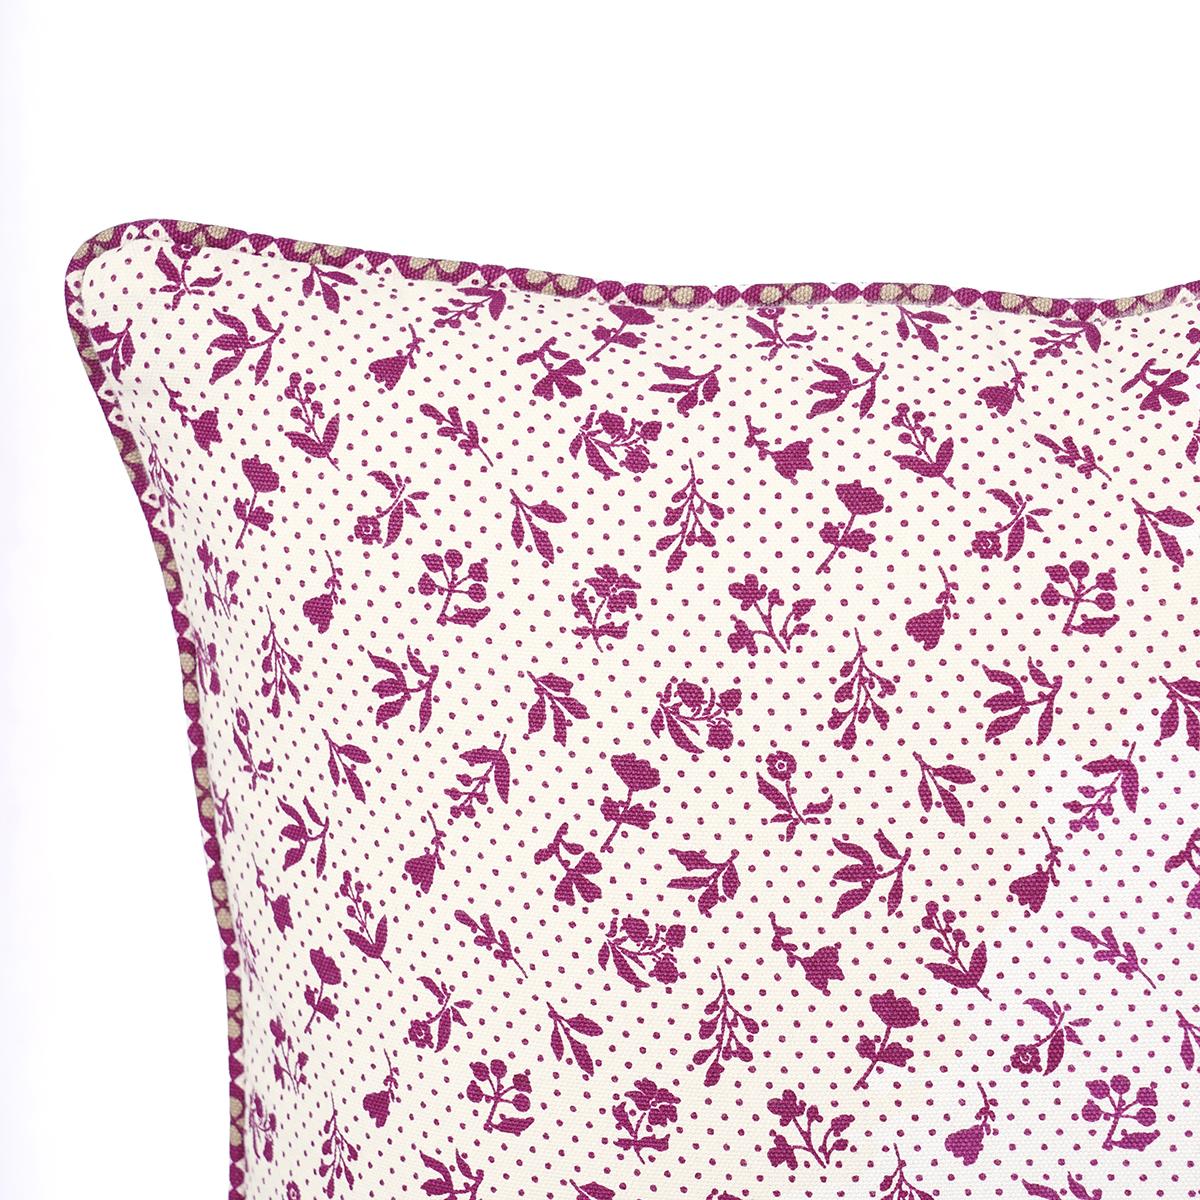 Plum DOMINOTERIE small floral print cotton pillow cover, sizes available